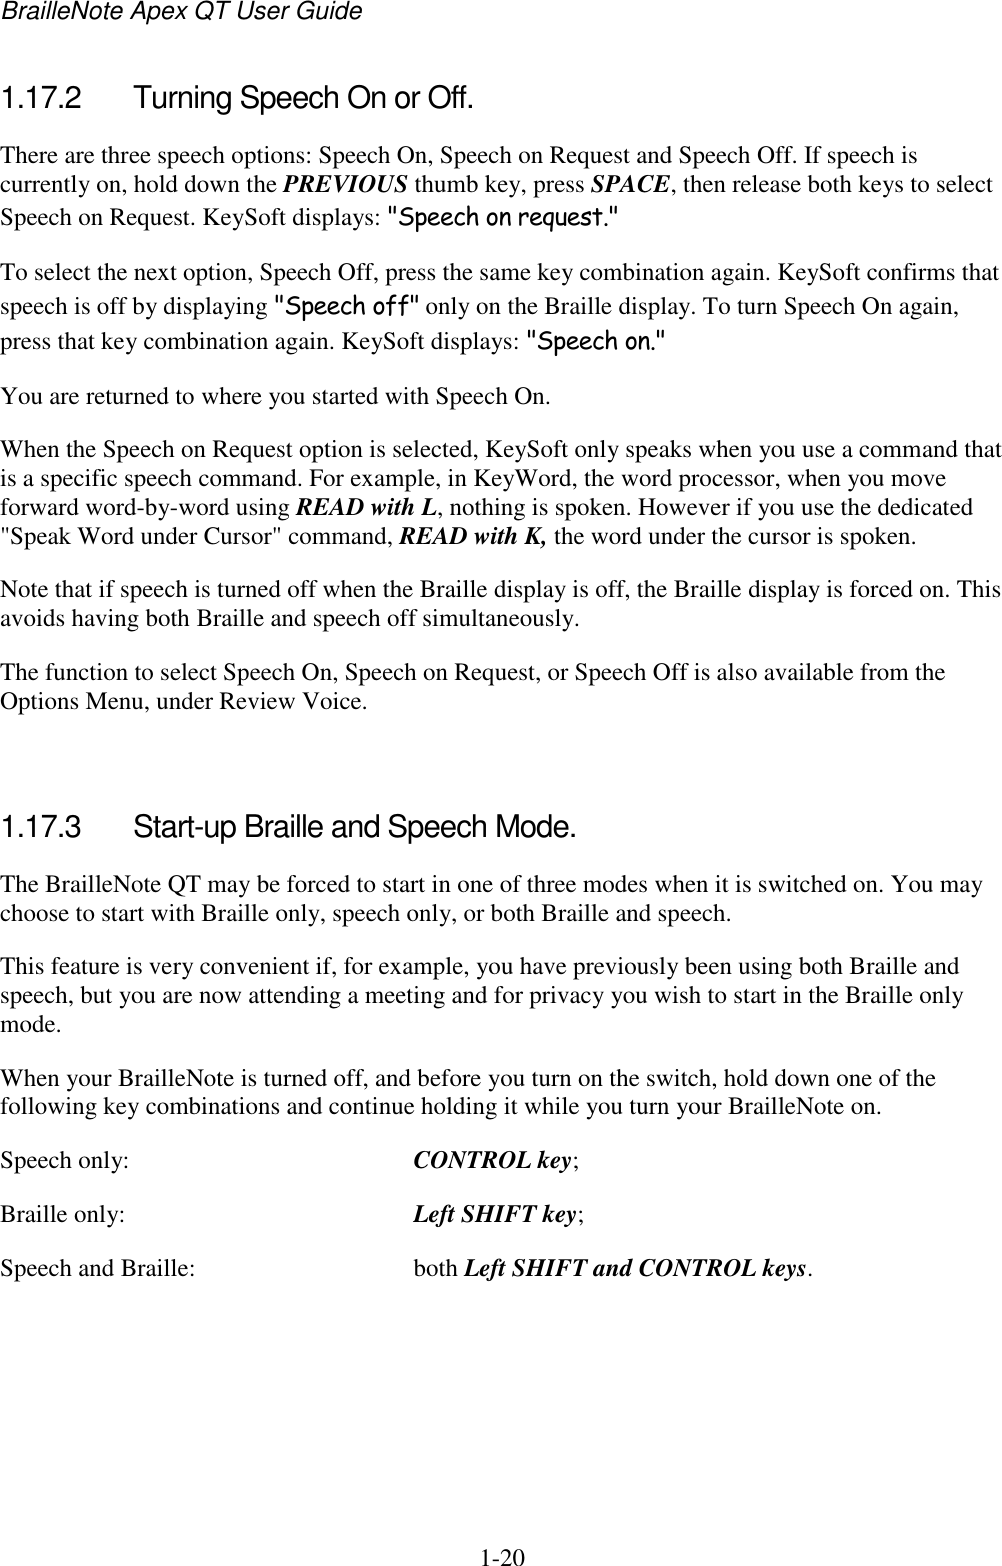 BrailleNote Apex QT User Guide  1-20   1.17.2  Turning Speech On or Off. There are three speech options: Speech On, Speech on Request and Speech Off. If speech is currently on, hold down the PREVIOUS thumb key, press SPACE, then release both keys to select Speech on Request. KeySoft displays: &quot;Speech on request.&quot; To select the next option, Speech Off, press the same key combination again. KeySoft confirms that speech is off by displaying &quot;Speech off&quot; only on the Braille display. To turn Speech On again, press that key combination again. KeySoft displays: &quot;Speech on.&quot; You are returned to where you started with Speech On. When the Speech on Request option is selected, KeySoft only speaks when you use a command that is a specific speech command. For example, in KeyWord, the word processor, when you move forward word-by-word using READ with L, nothing is spoken. However if you use the dedicated &quot;Speak Word under Cursor&quot; command, READ with K, the word under the cursor is spoken. Note that if speech is turned off when the Braille display is off, the Braille display is forced on. This avoids having both Braille and speech off simultaneously. The function to select Speech On, Speech on Request, or Speech Off is also available from the Options Menu, under Review Voice.   1.17.3  Start-up Braille and Speech Mode. The BrailleNote QT may be forced to start in one of three modes when it is switched on. You may choose to start with Braille only, speech only, or both Braille and speech. This feature is very convenient if, for example, you have previously been using both Braille and speech, but you are now attending a meeting and for privacy you wish to start in the Braille only mode. When your BrailleNote is turned off, and before you turn on the switch, hold down one of the following key combinations and continue holding it while you turn your BrailleNote on. Speech only:  CONTROL key; Braille only:  Left SHIFT key; Speech and Braille:  both Left SHIFT and CONTROL keys.  